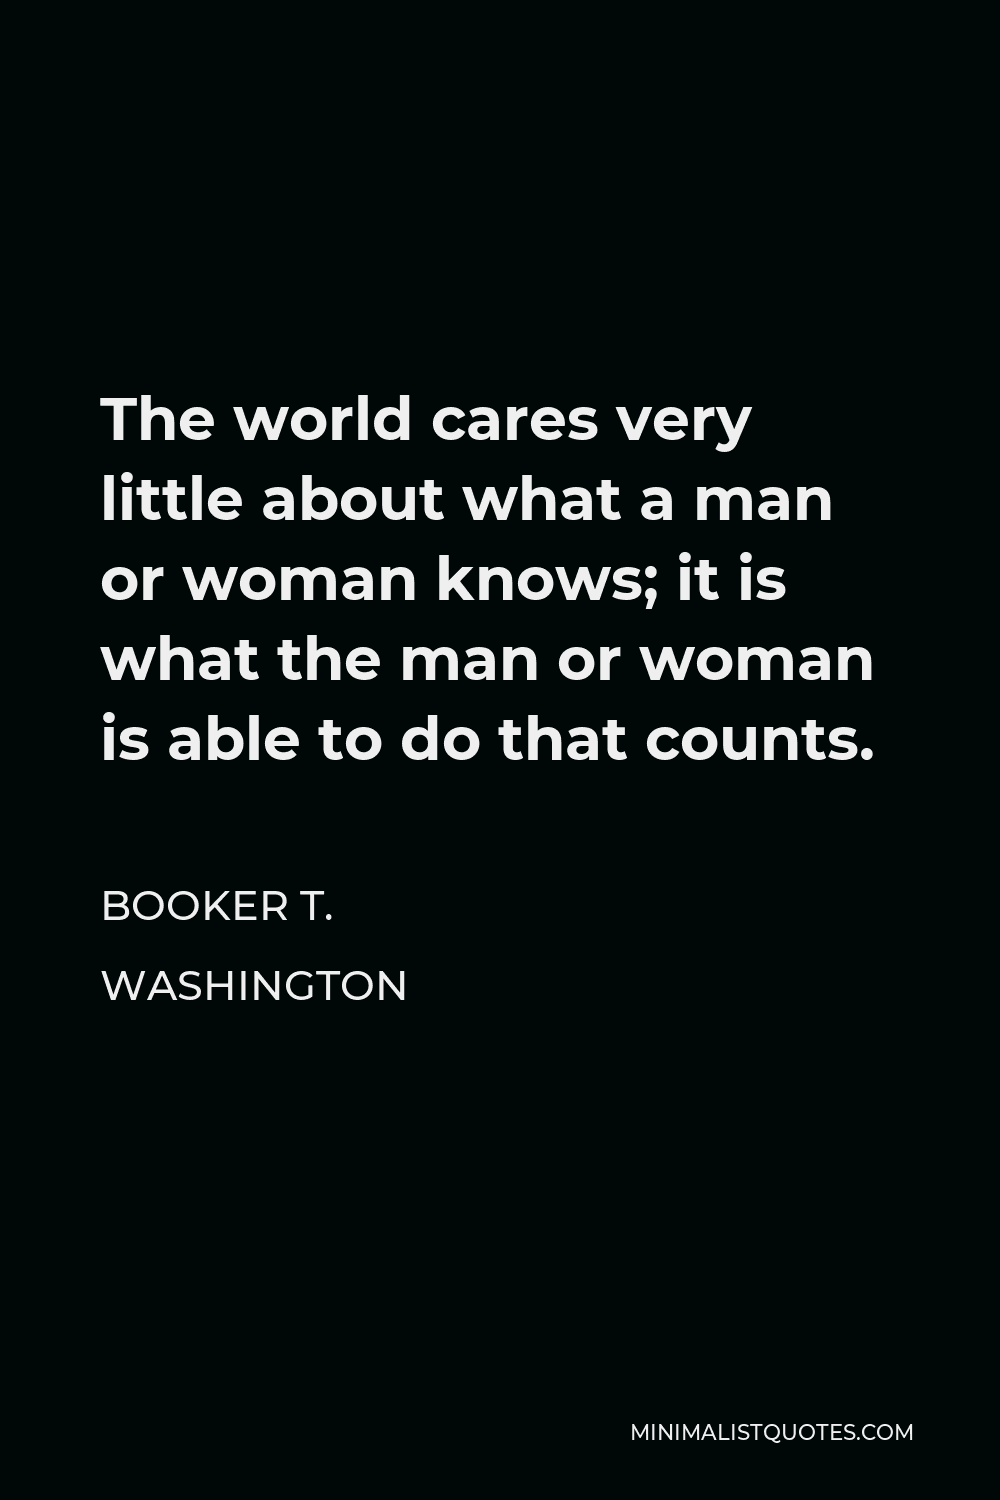 Booker T. Washington Quote - The world cares very little about what a man or woman knows; it is what the man or woman is able to do that counts.